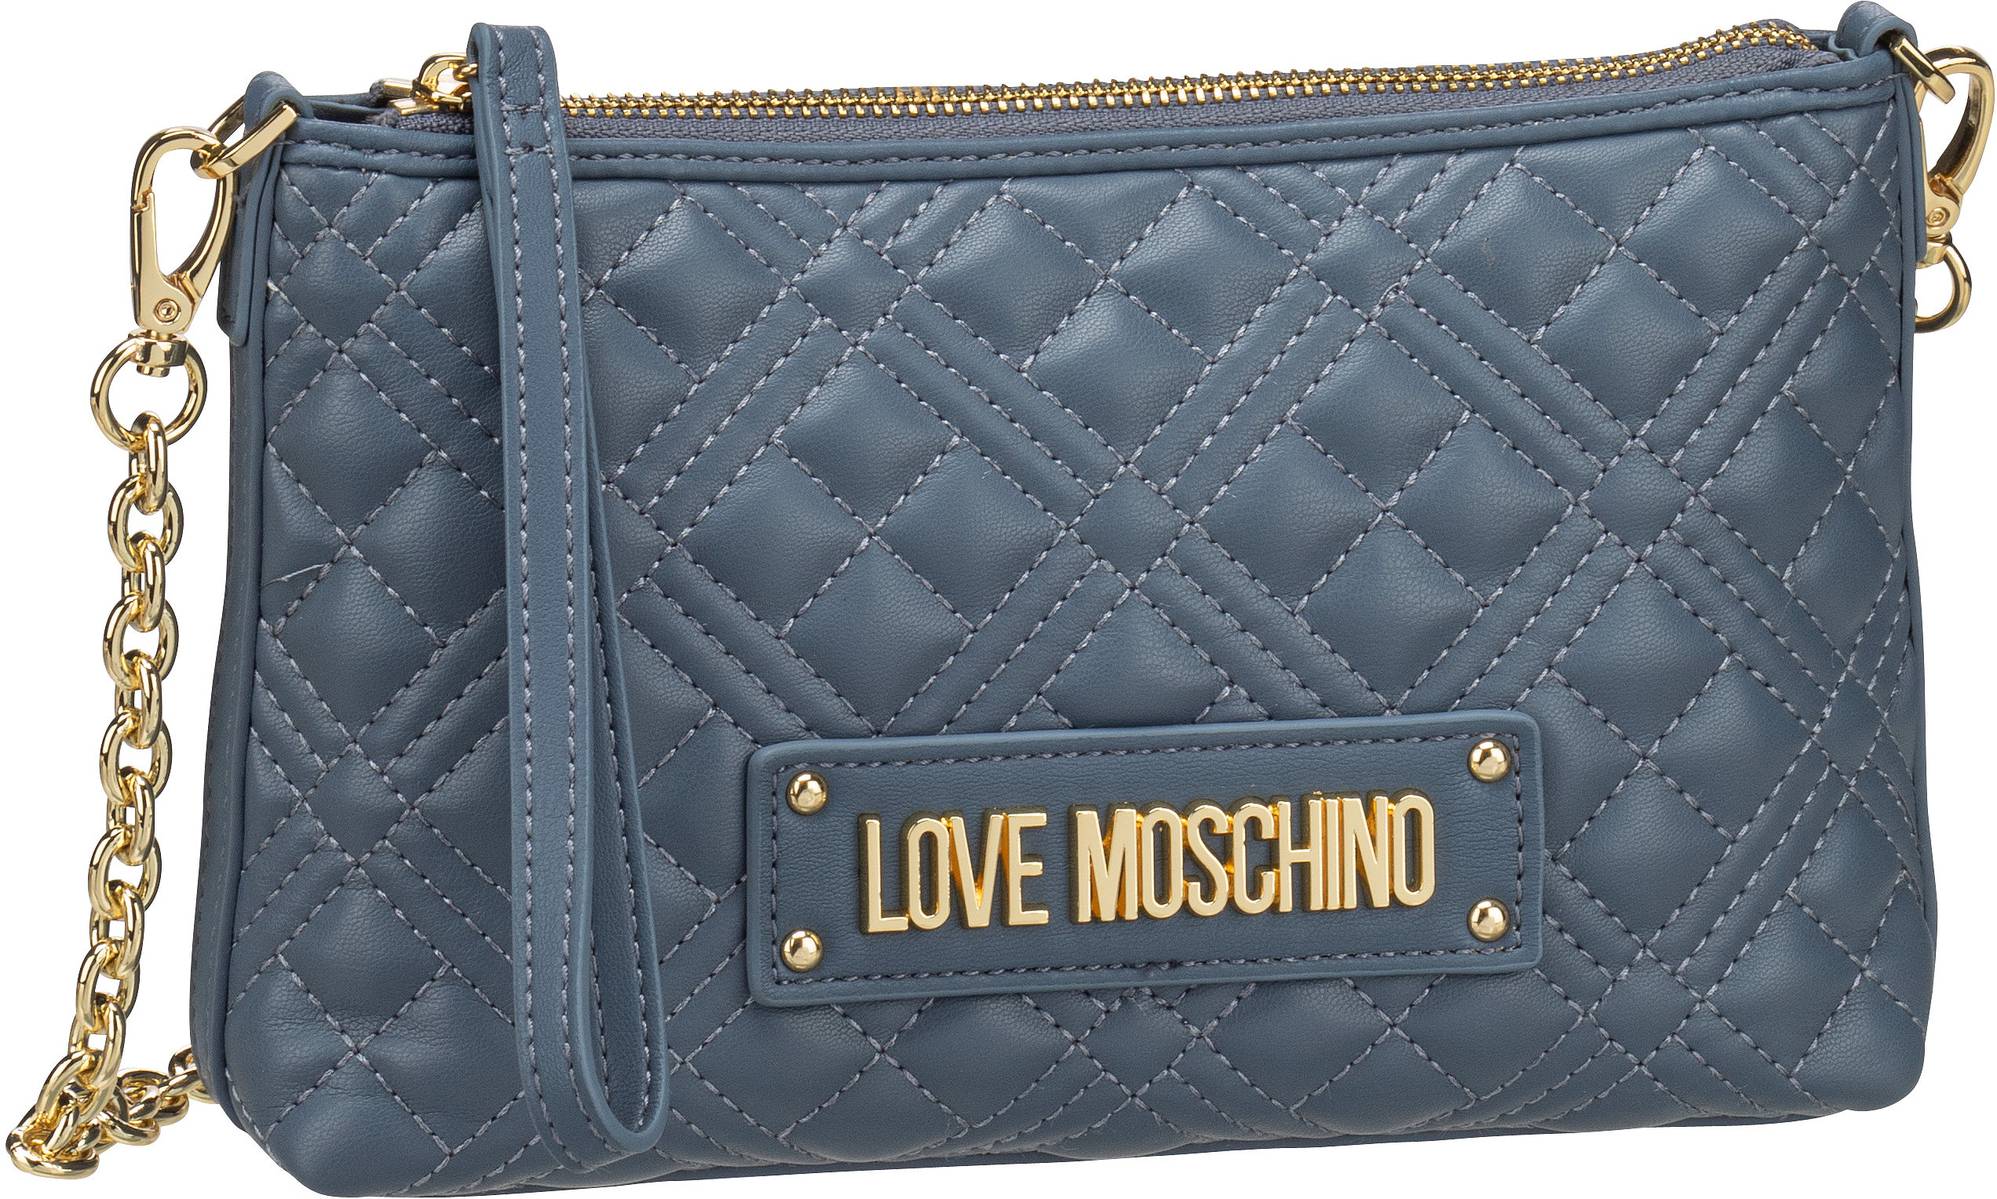 Love Moschino Quilted Bag 4013 - Denim